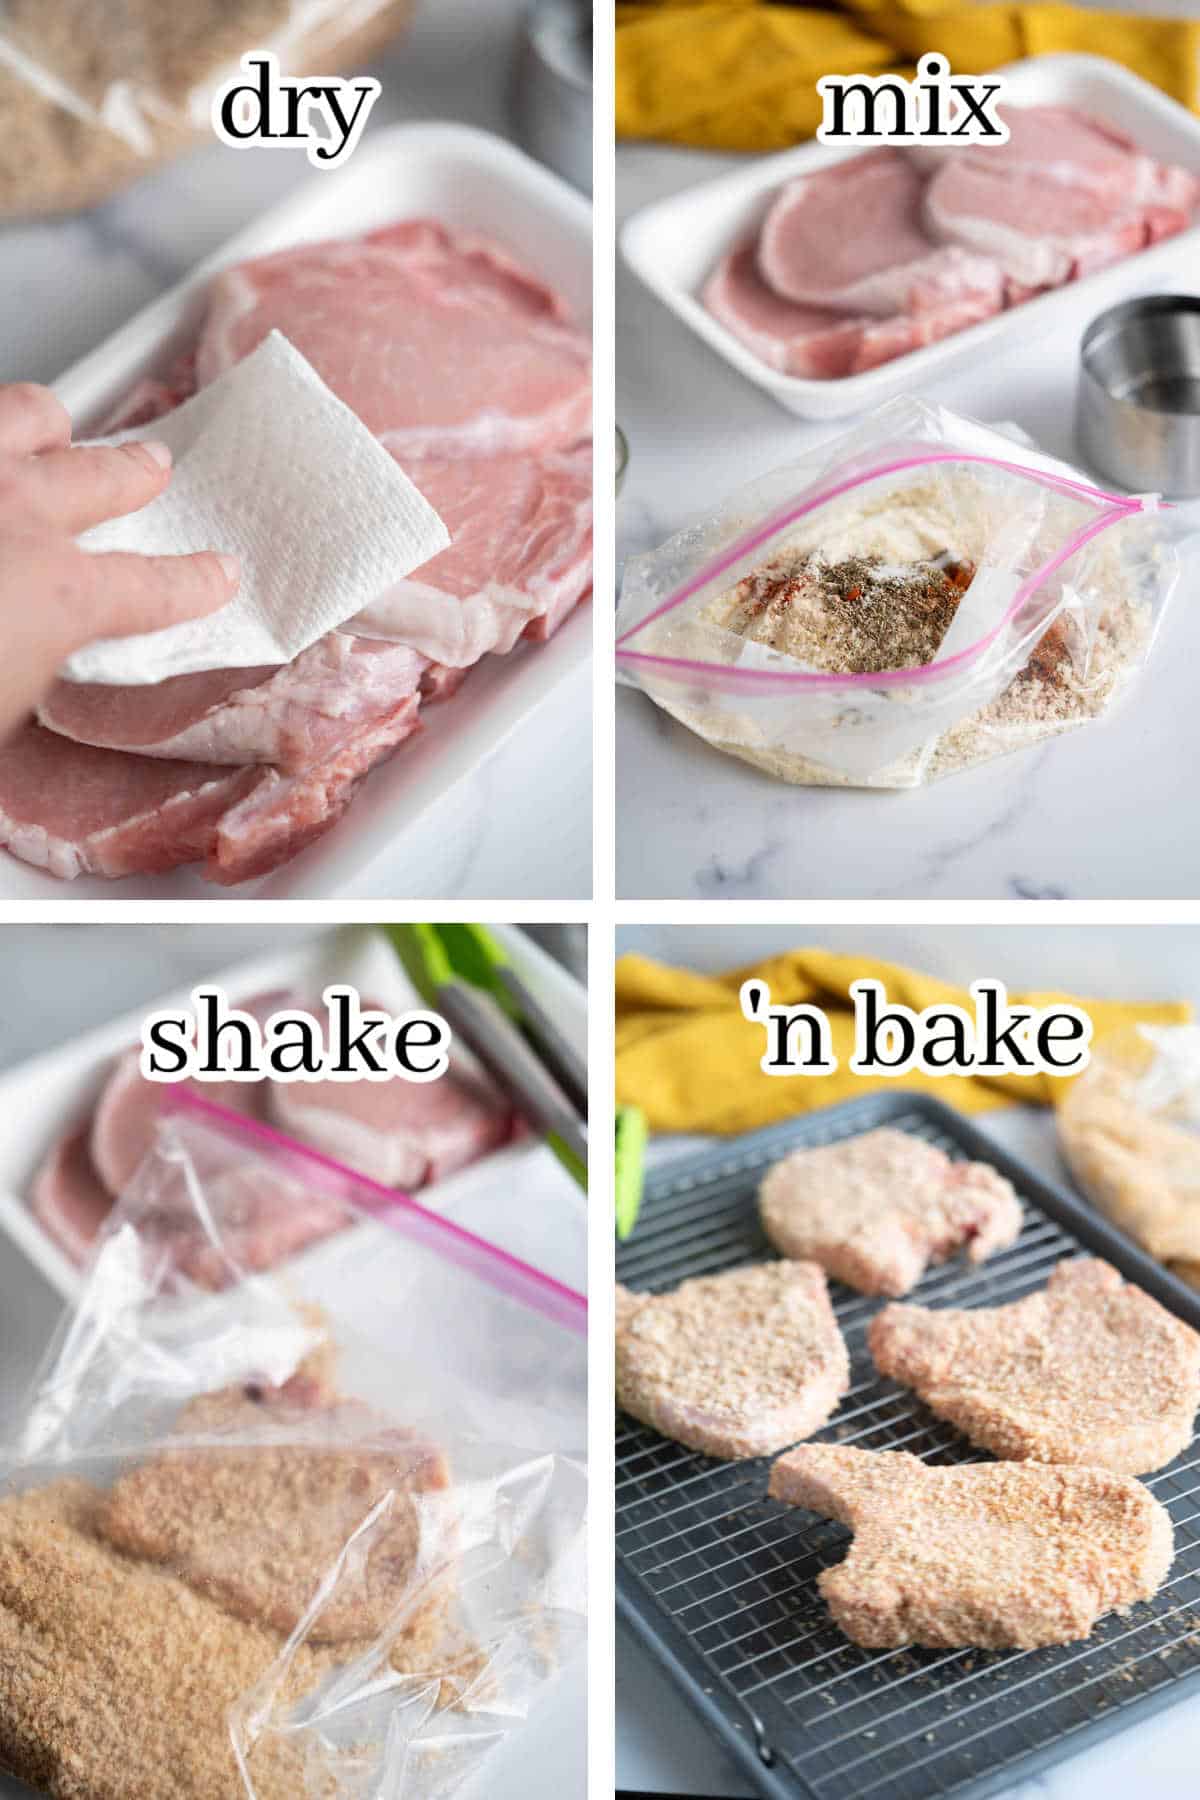 Step-by-step instructions to make the recipe, with print overlay.